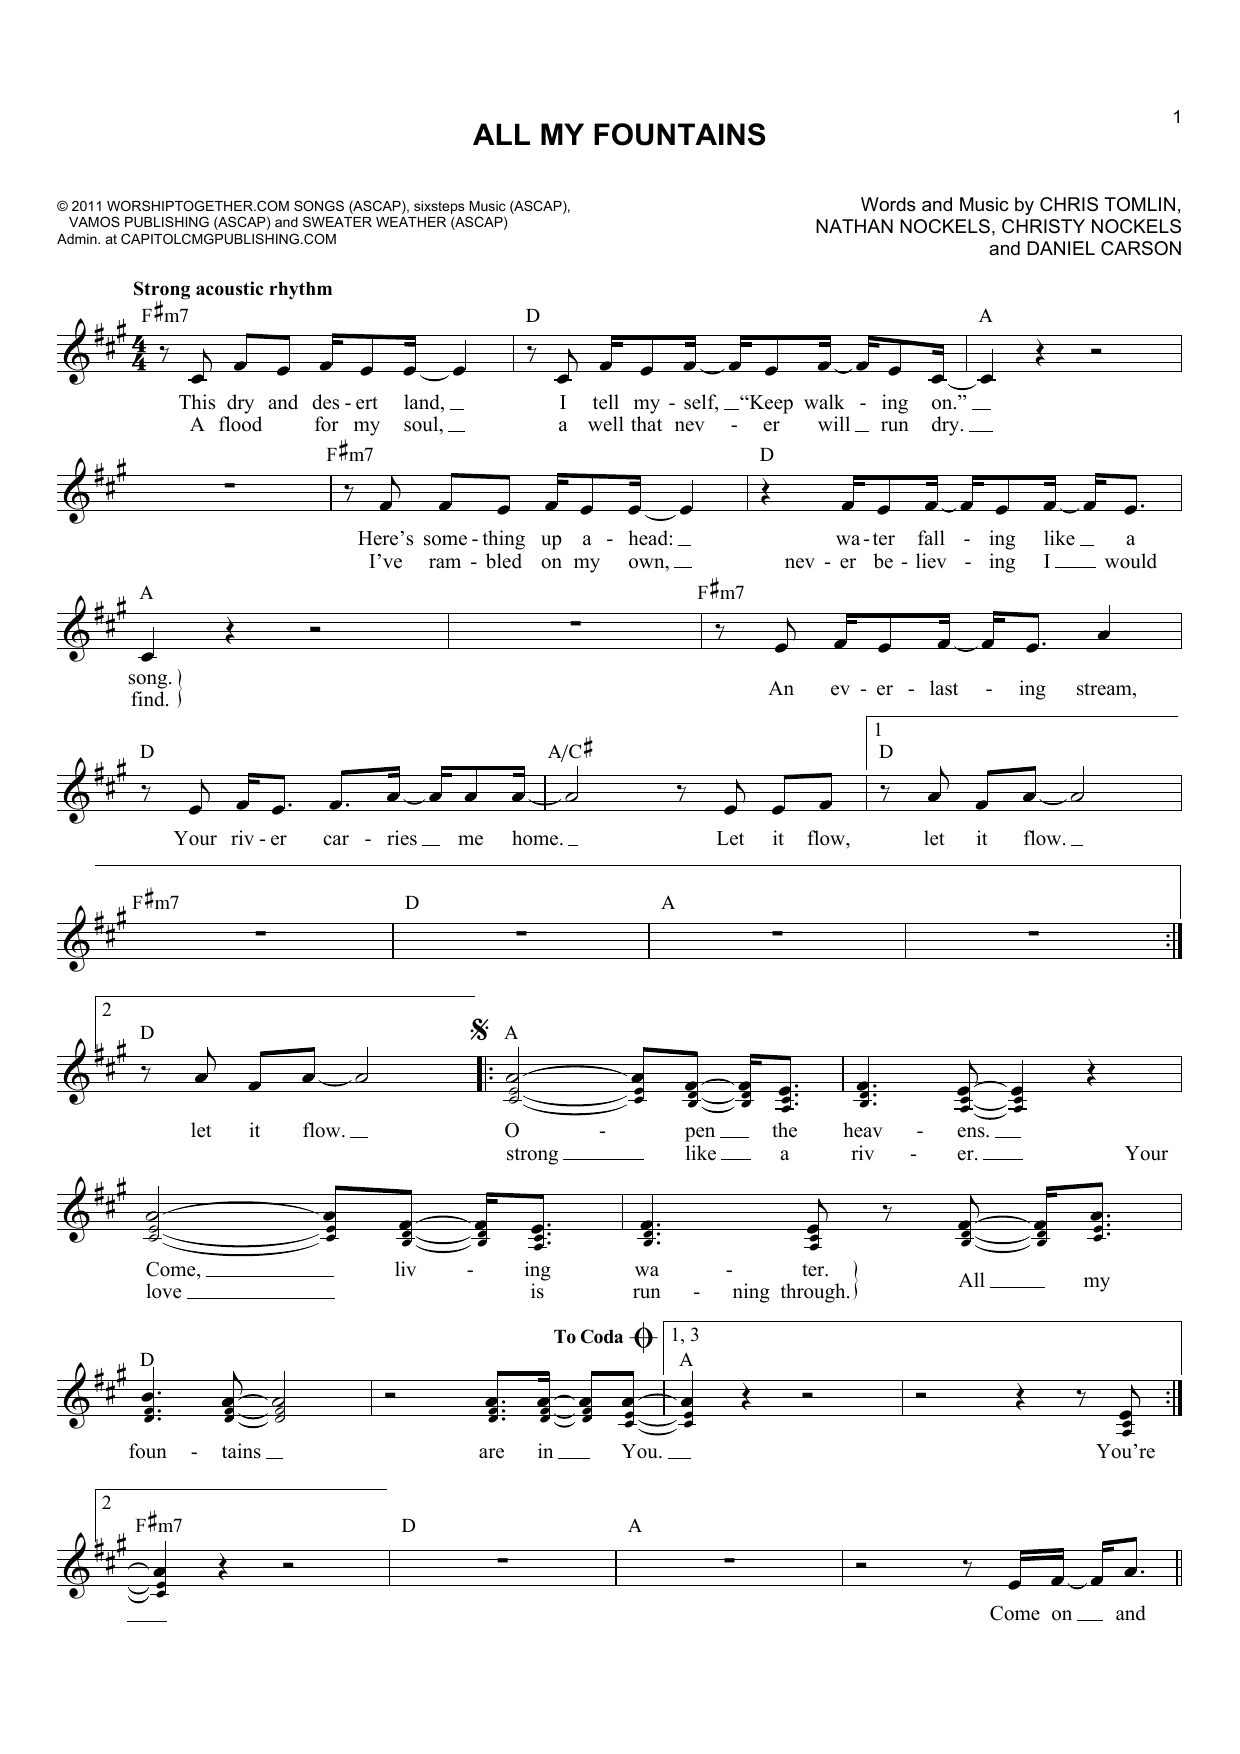 Download Passion All My Fountains Sheet Music